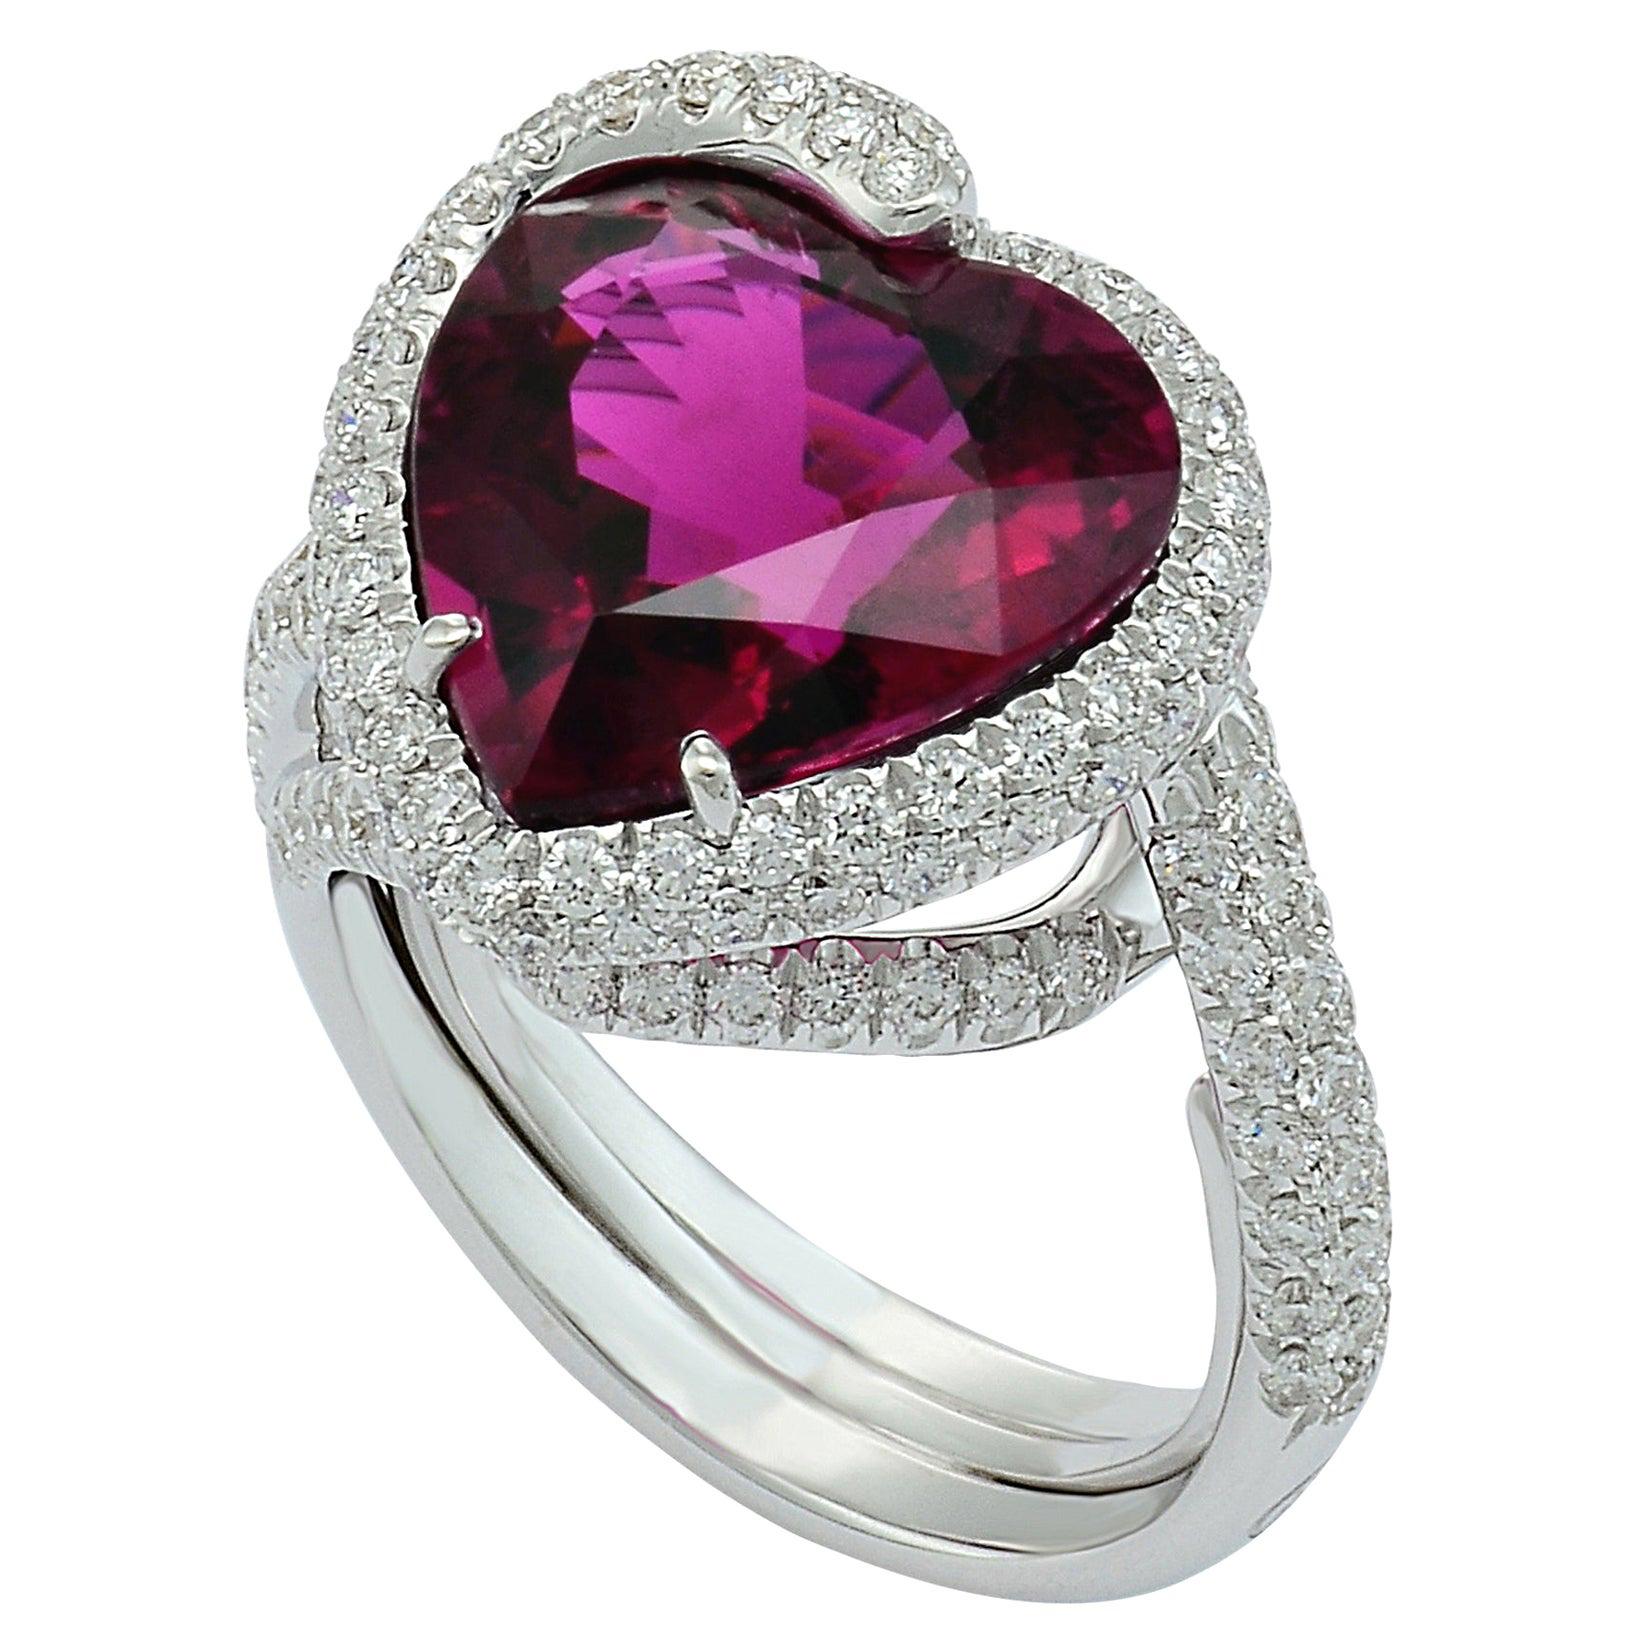 This enchanting ring  had been handcrafted  in Margherita Burgener workshop, based in Italy.
The ring centers a beautiful, clean, vivid red, heart shaped rubellite tourmaline. 

Matching earrings ( demi-parure) are available and can be bought